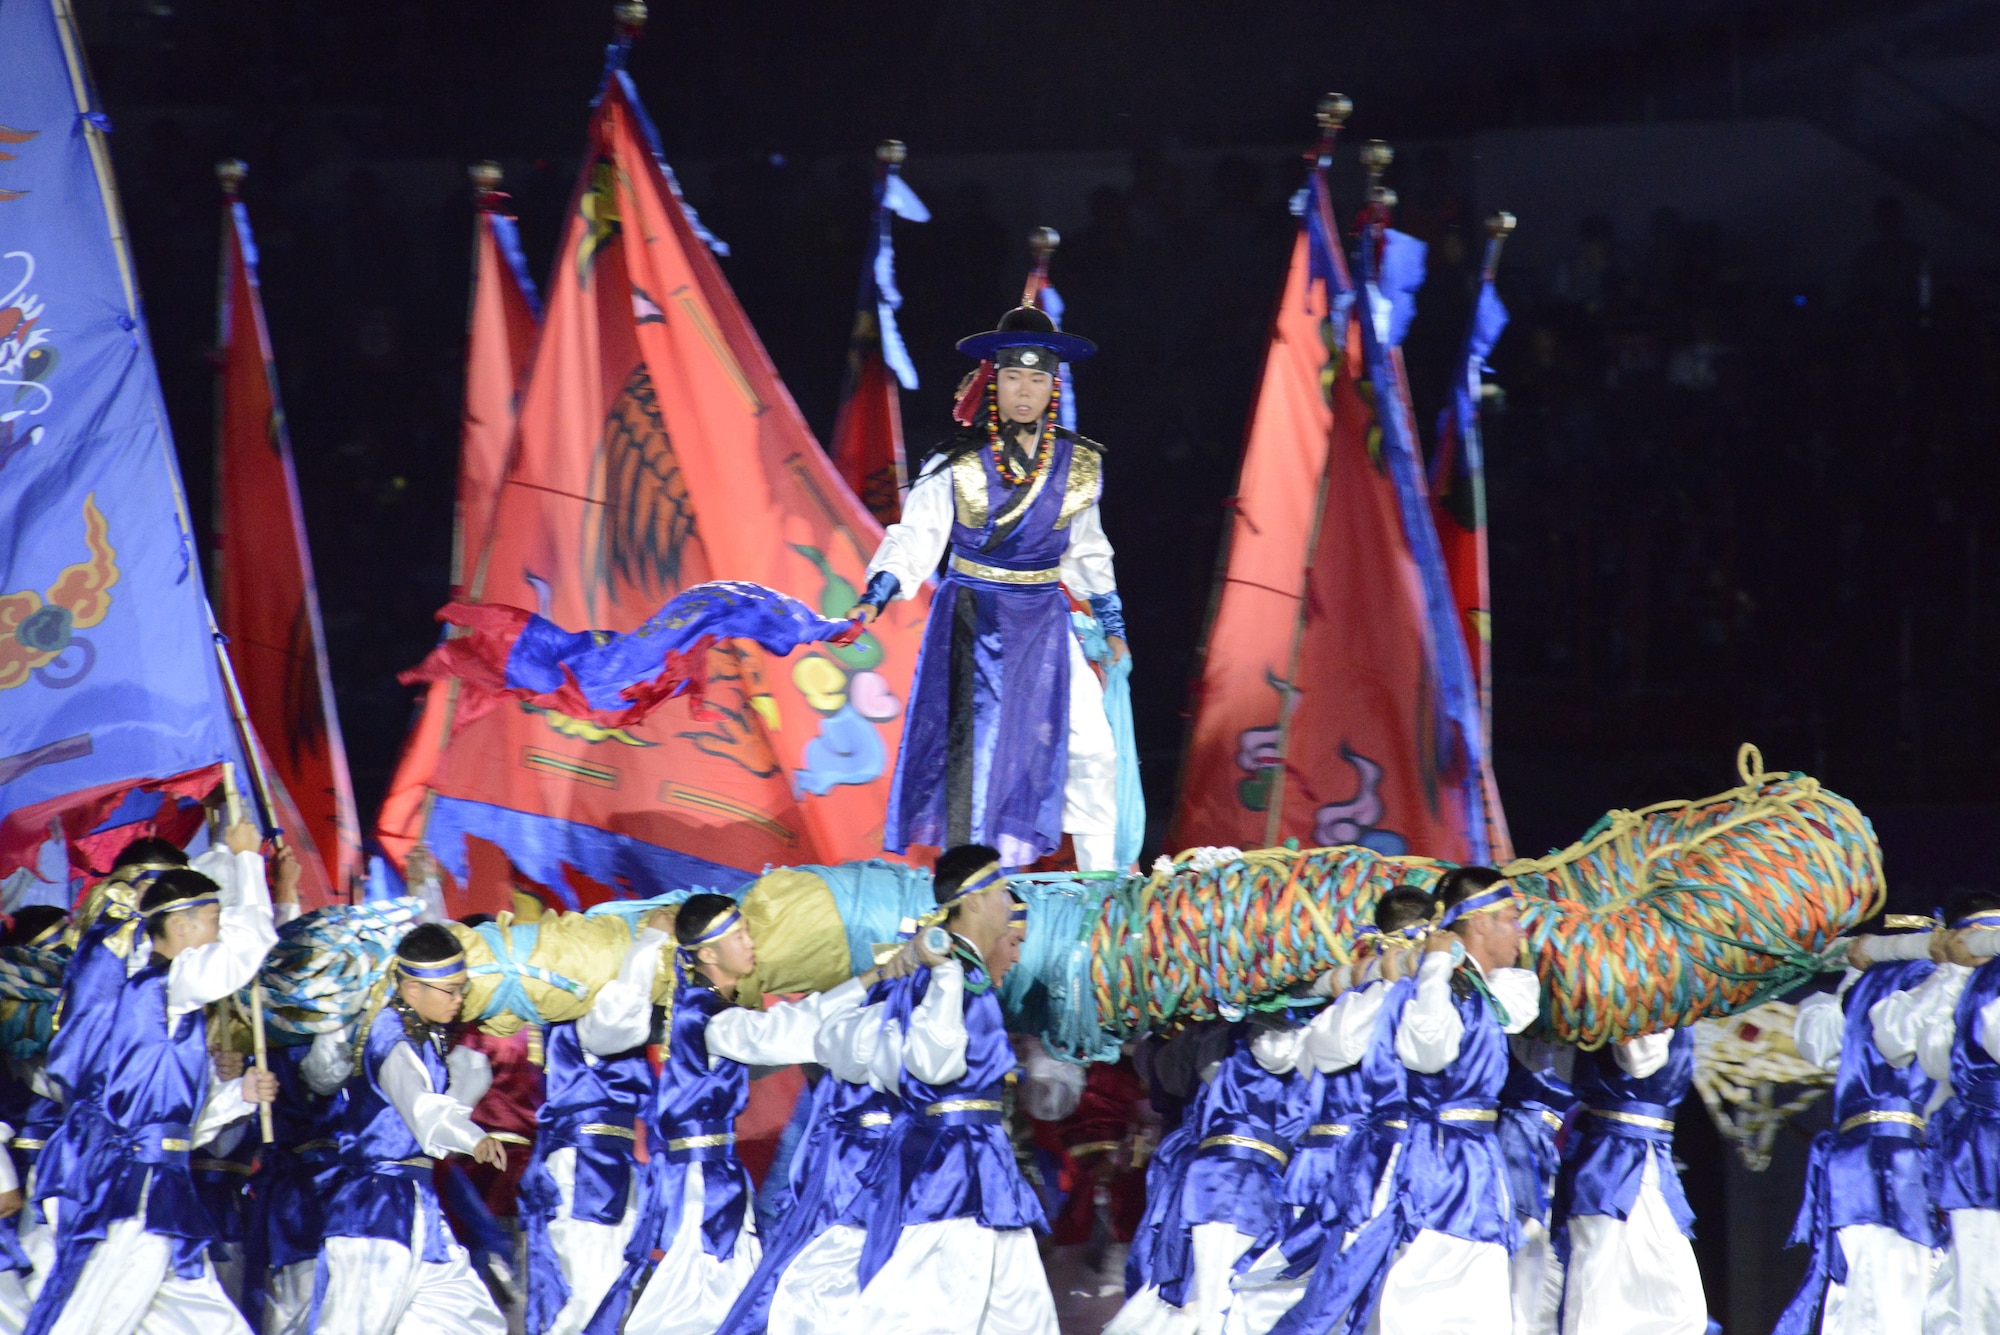 A scene of the opening ceremony of the CISM World Games depicts the traditional Korean game called Chajeon Nori. It involves teams of men carrying large log frames called dongchae. Atop each dongchae is a commander who directs his team to maneuver against the opposing team.